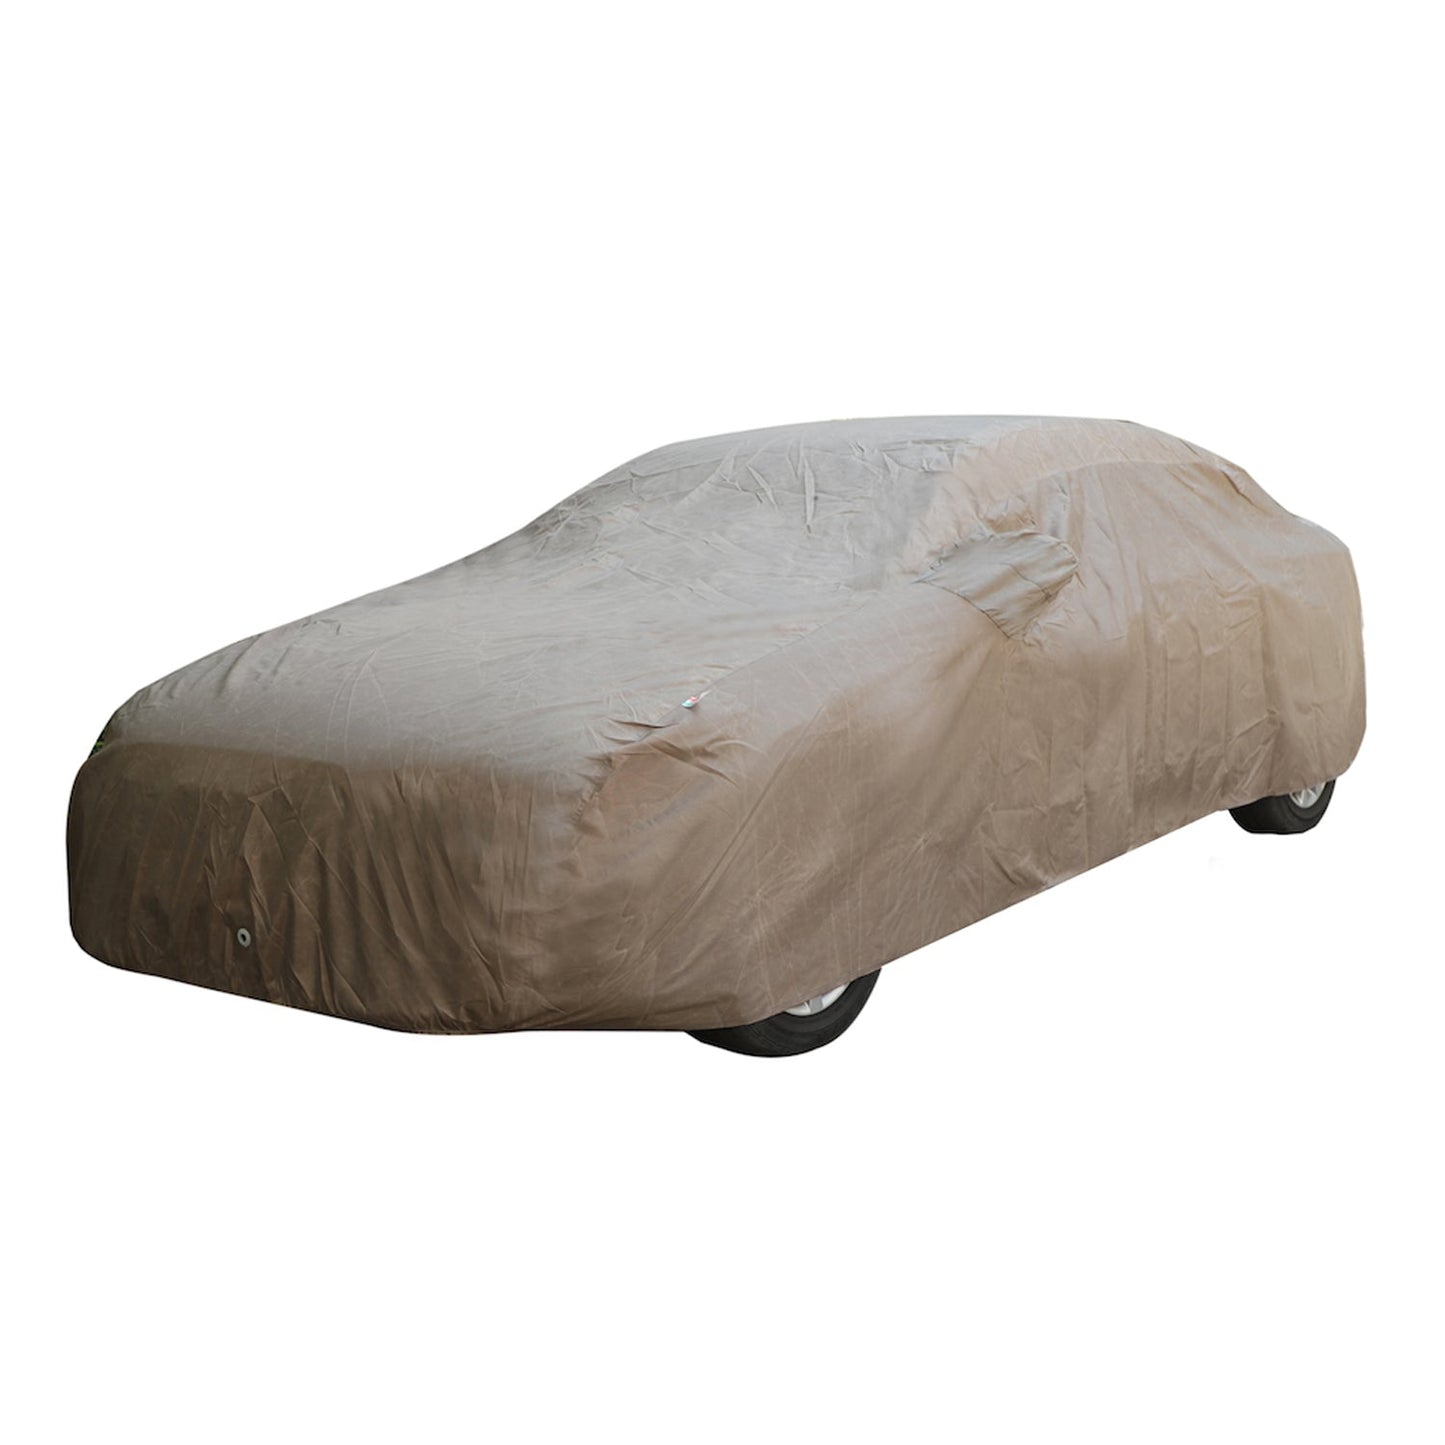 Oshotto Brown 100% Waterproof Car Body Cover with Mirror Pockets For Tata Indica